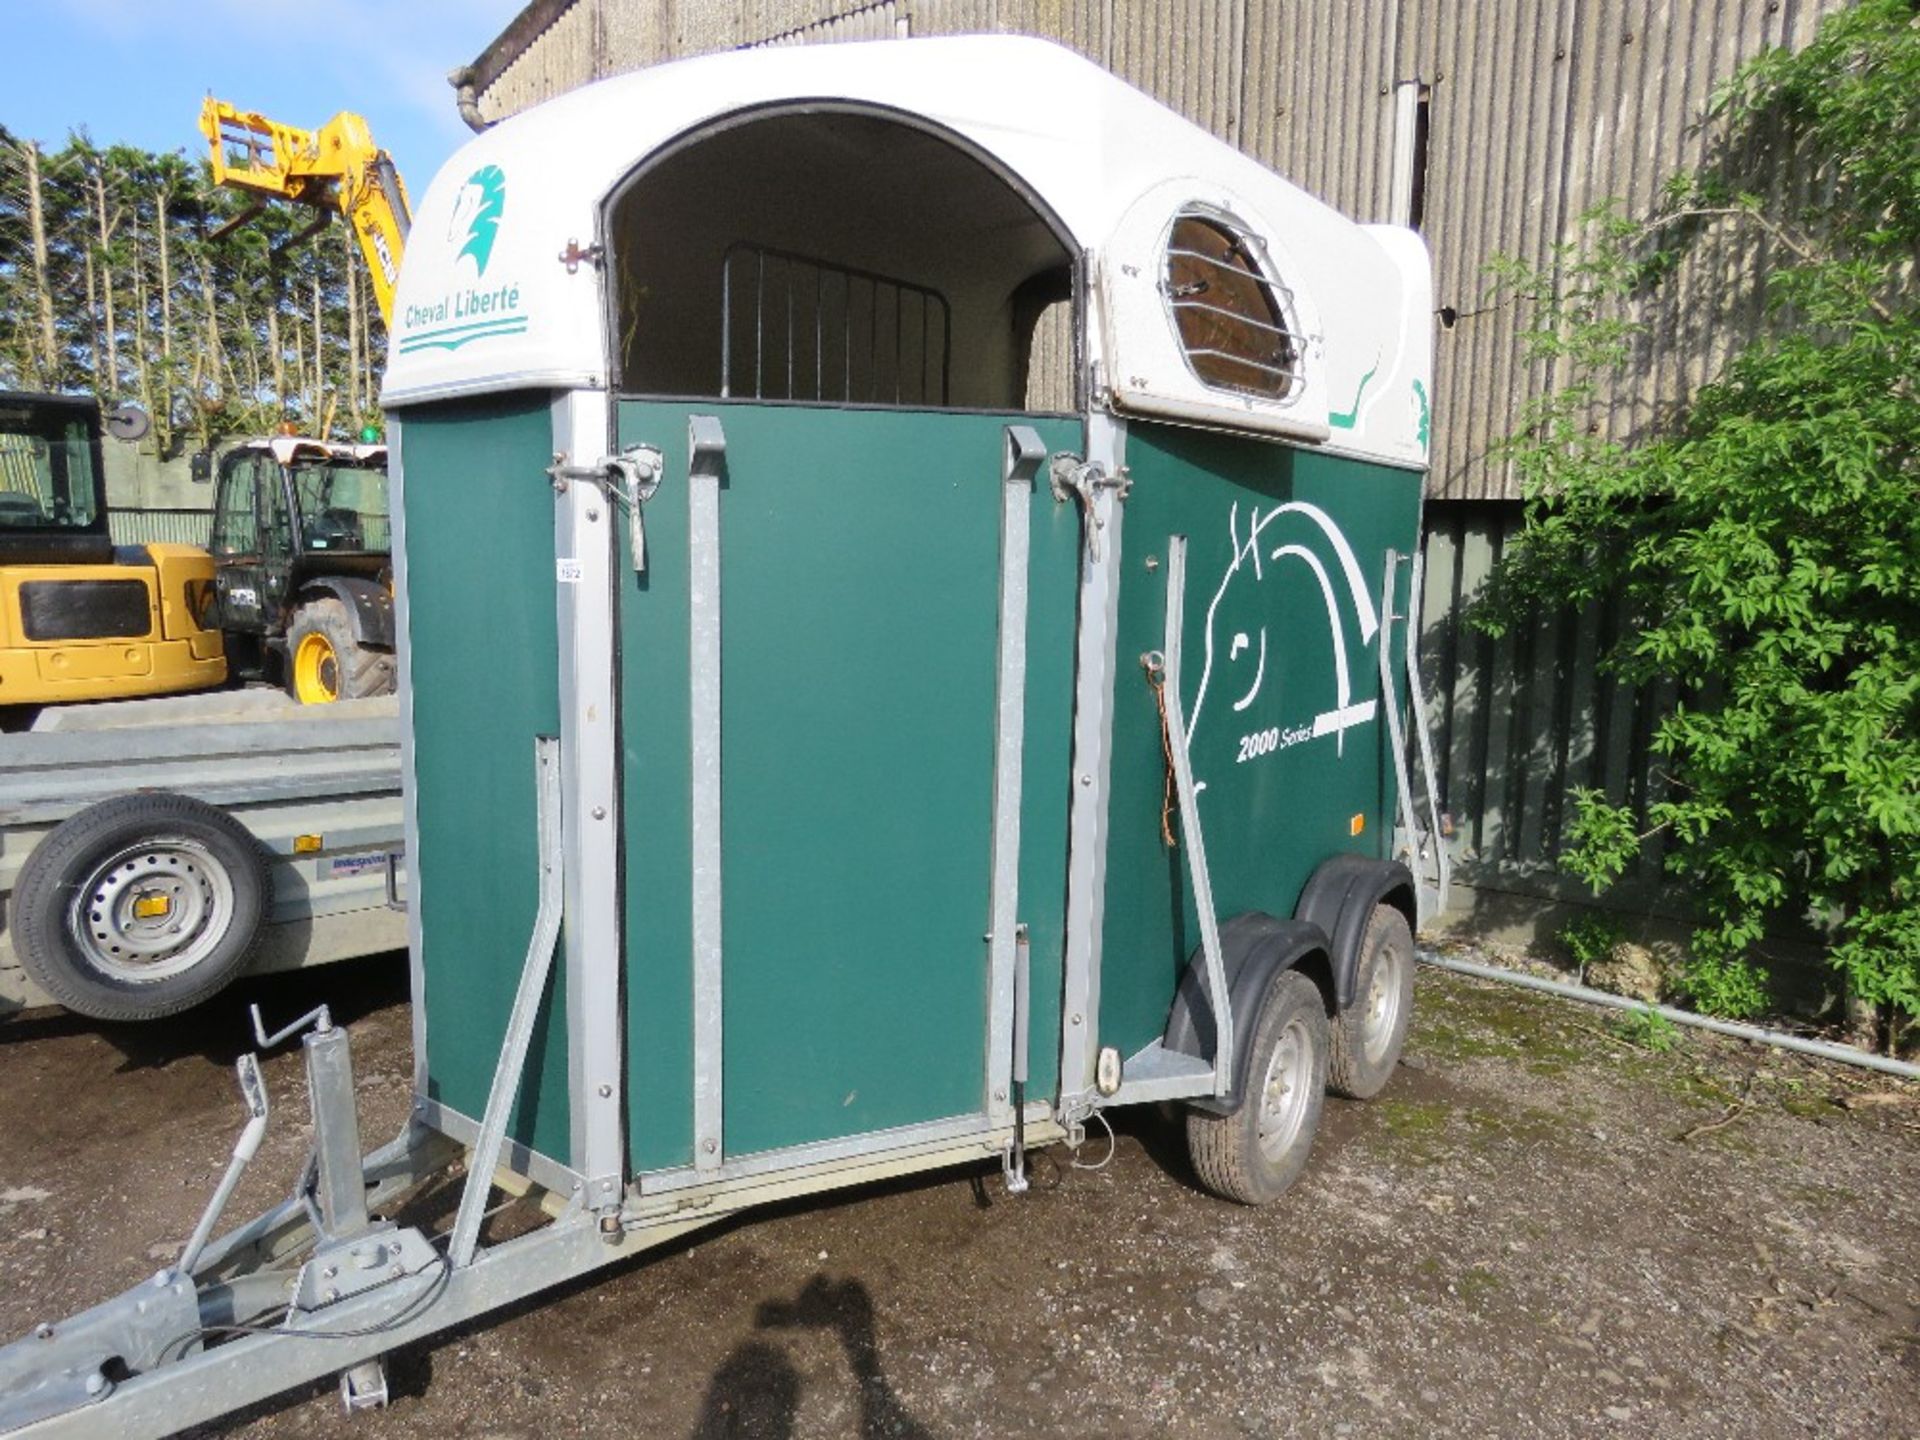 PULLMAN CHEVAL LIBERTE 2000 SERIES / TYPE 2003 HORSE TRAILER WITH FRONT AND REAR RAMPS. YEAR 2008 BU